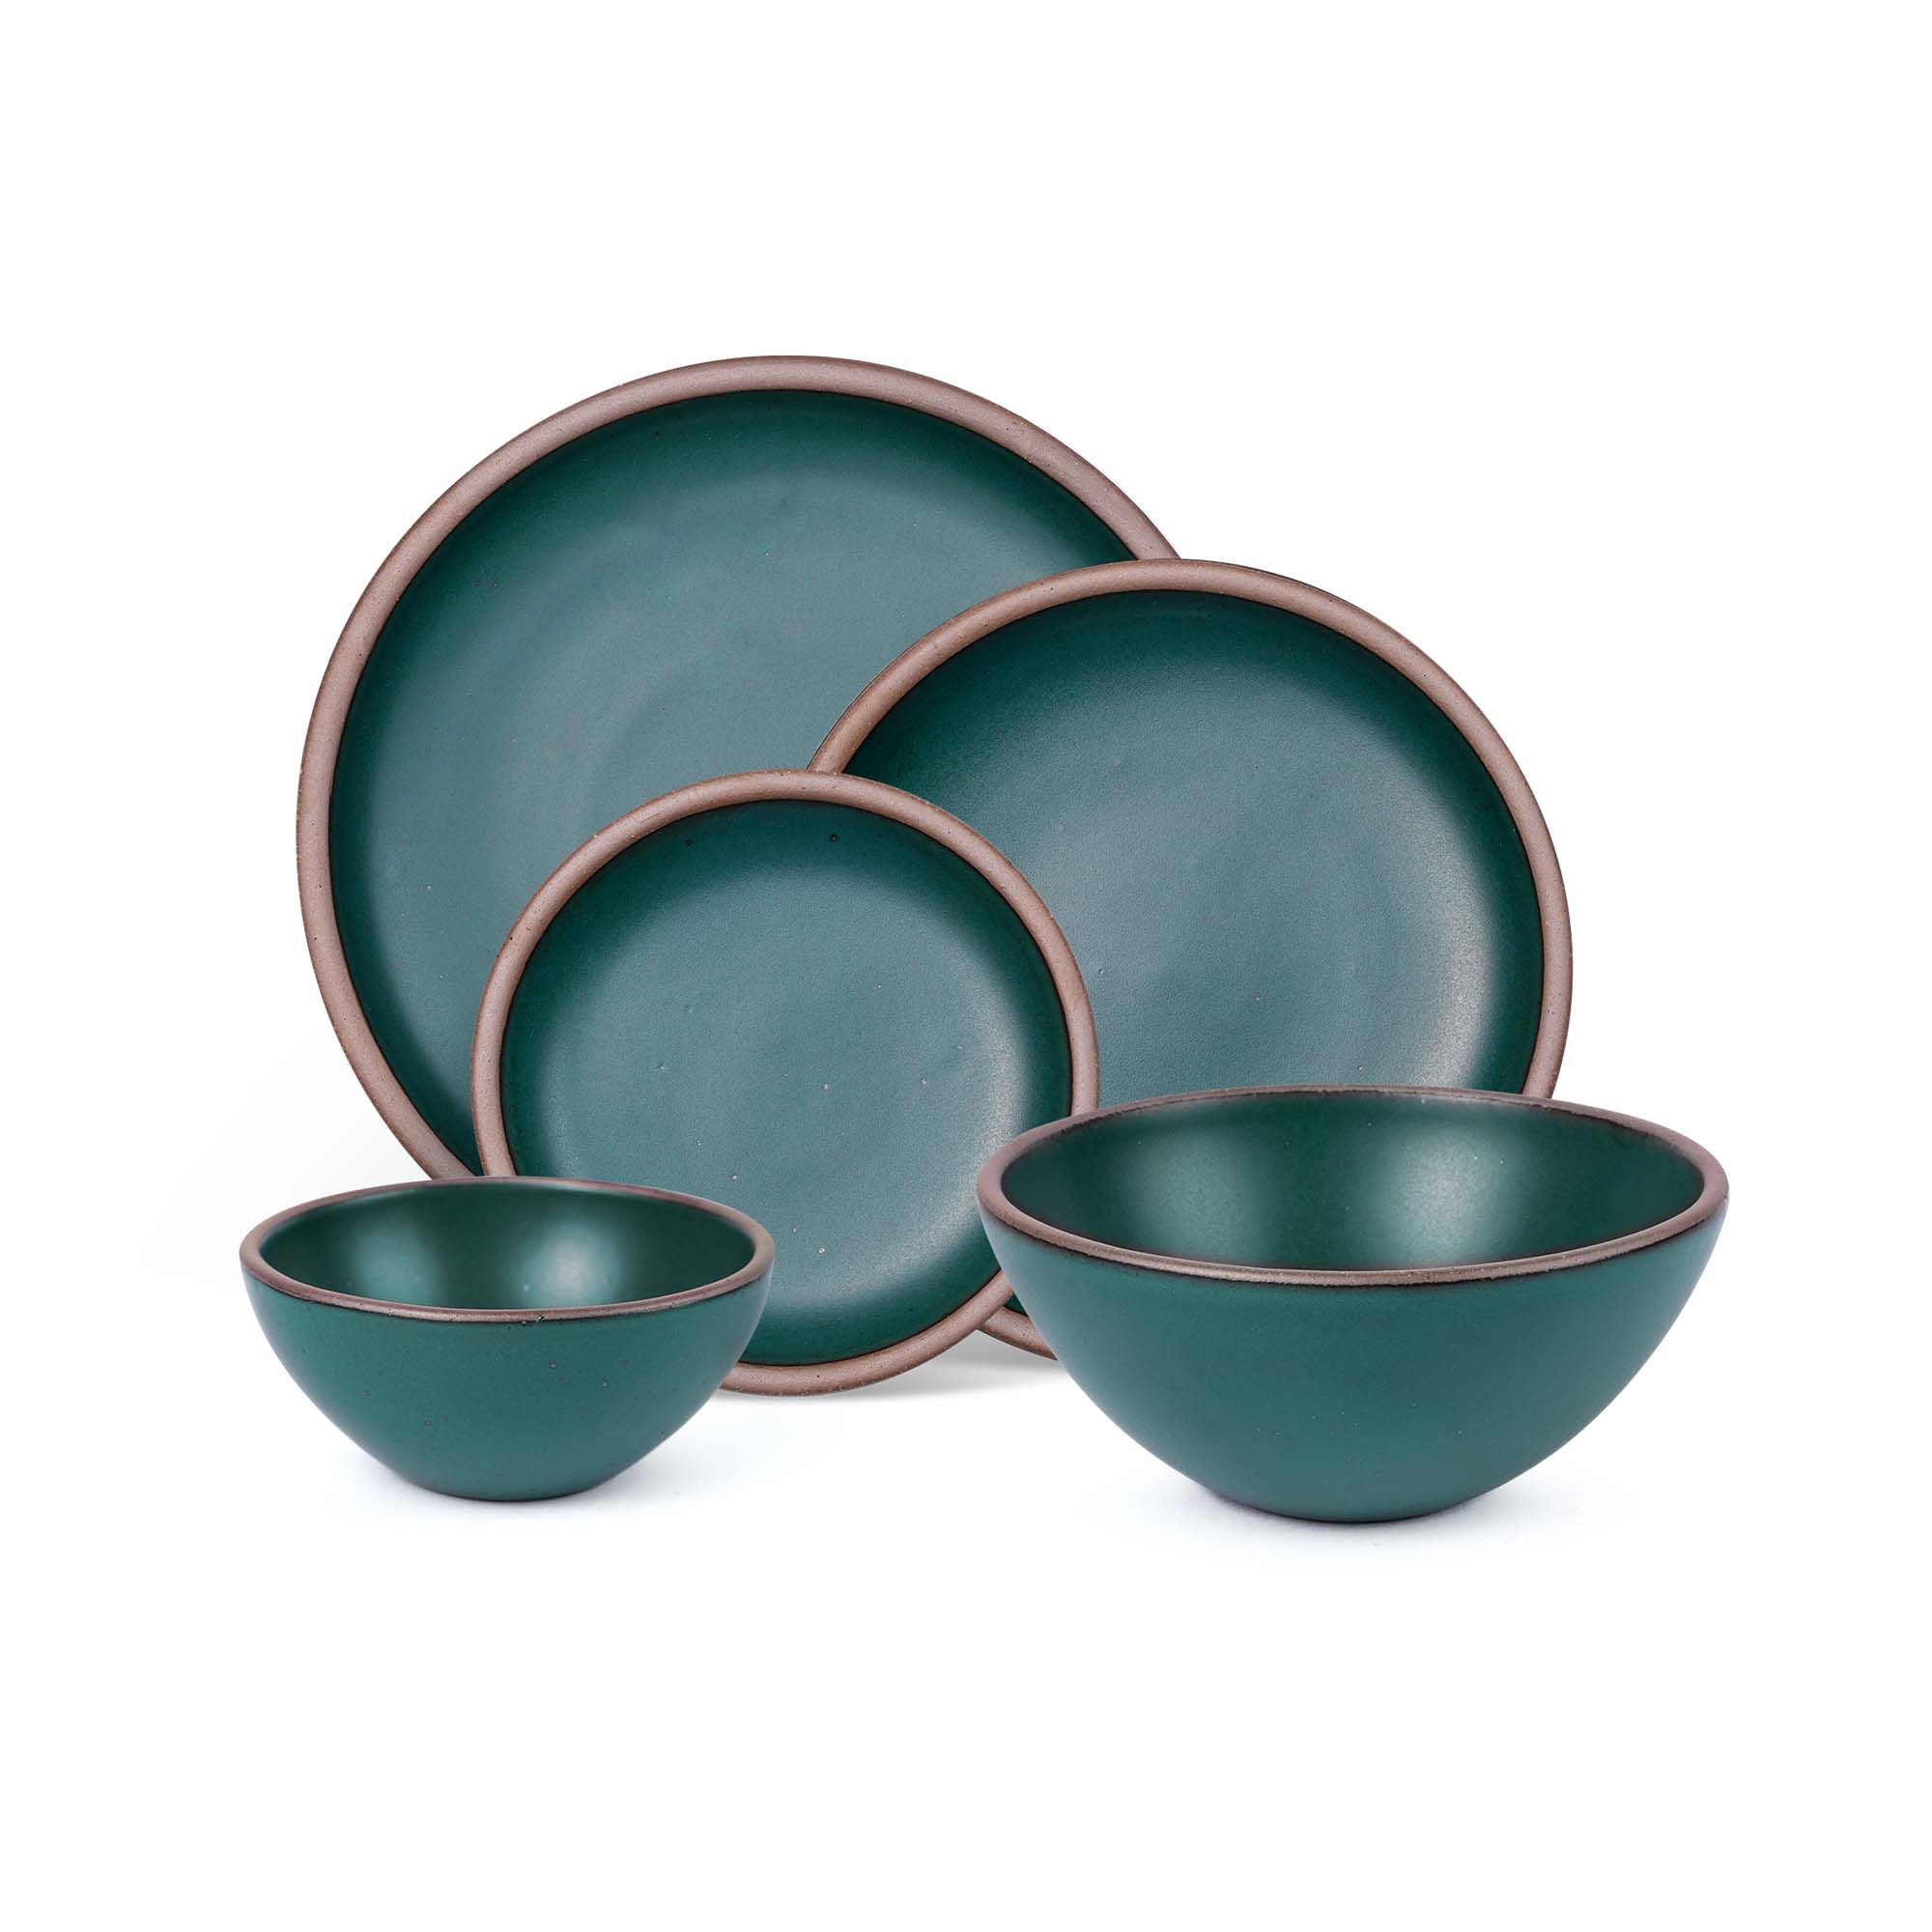 An ice cream bowl, soup bowl, cake plate, side plate and dinner plate paired together in a deep dark teal featuring iron speckles